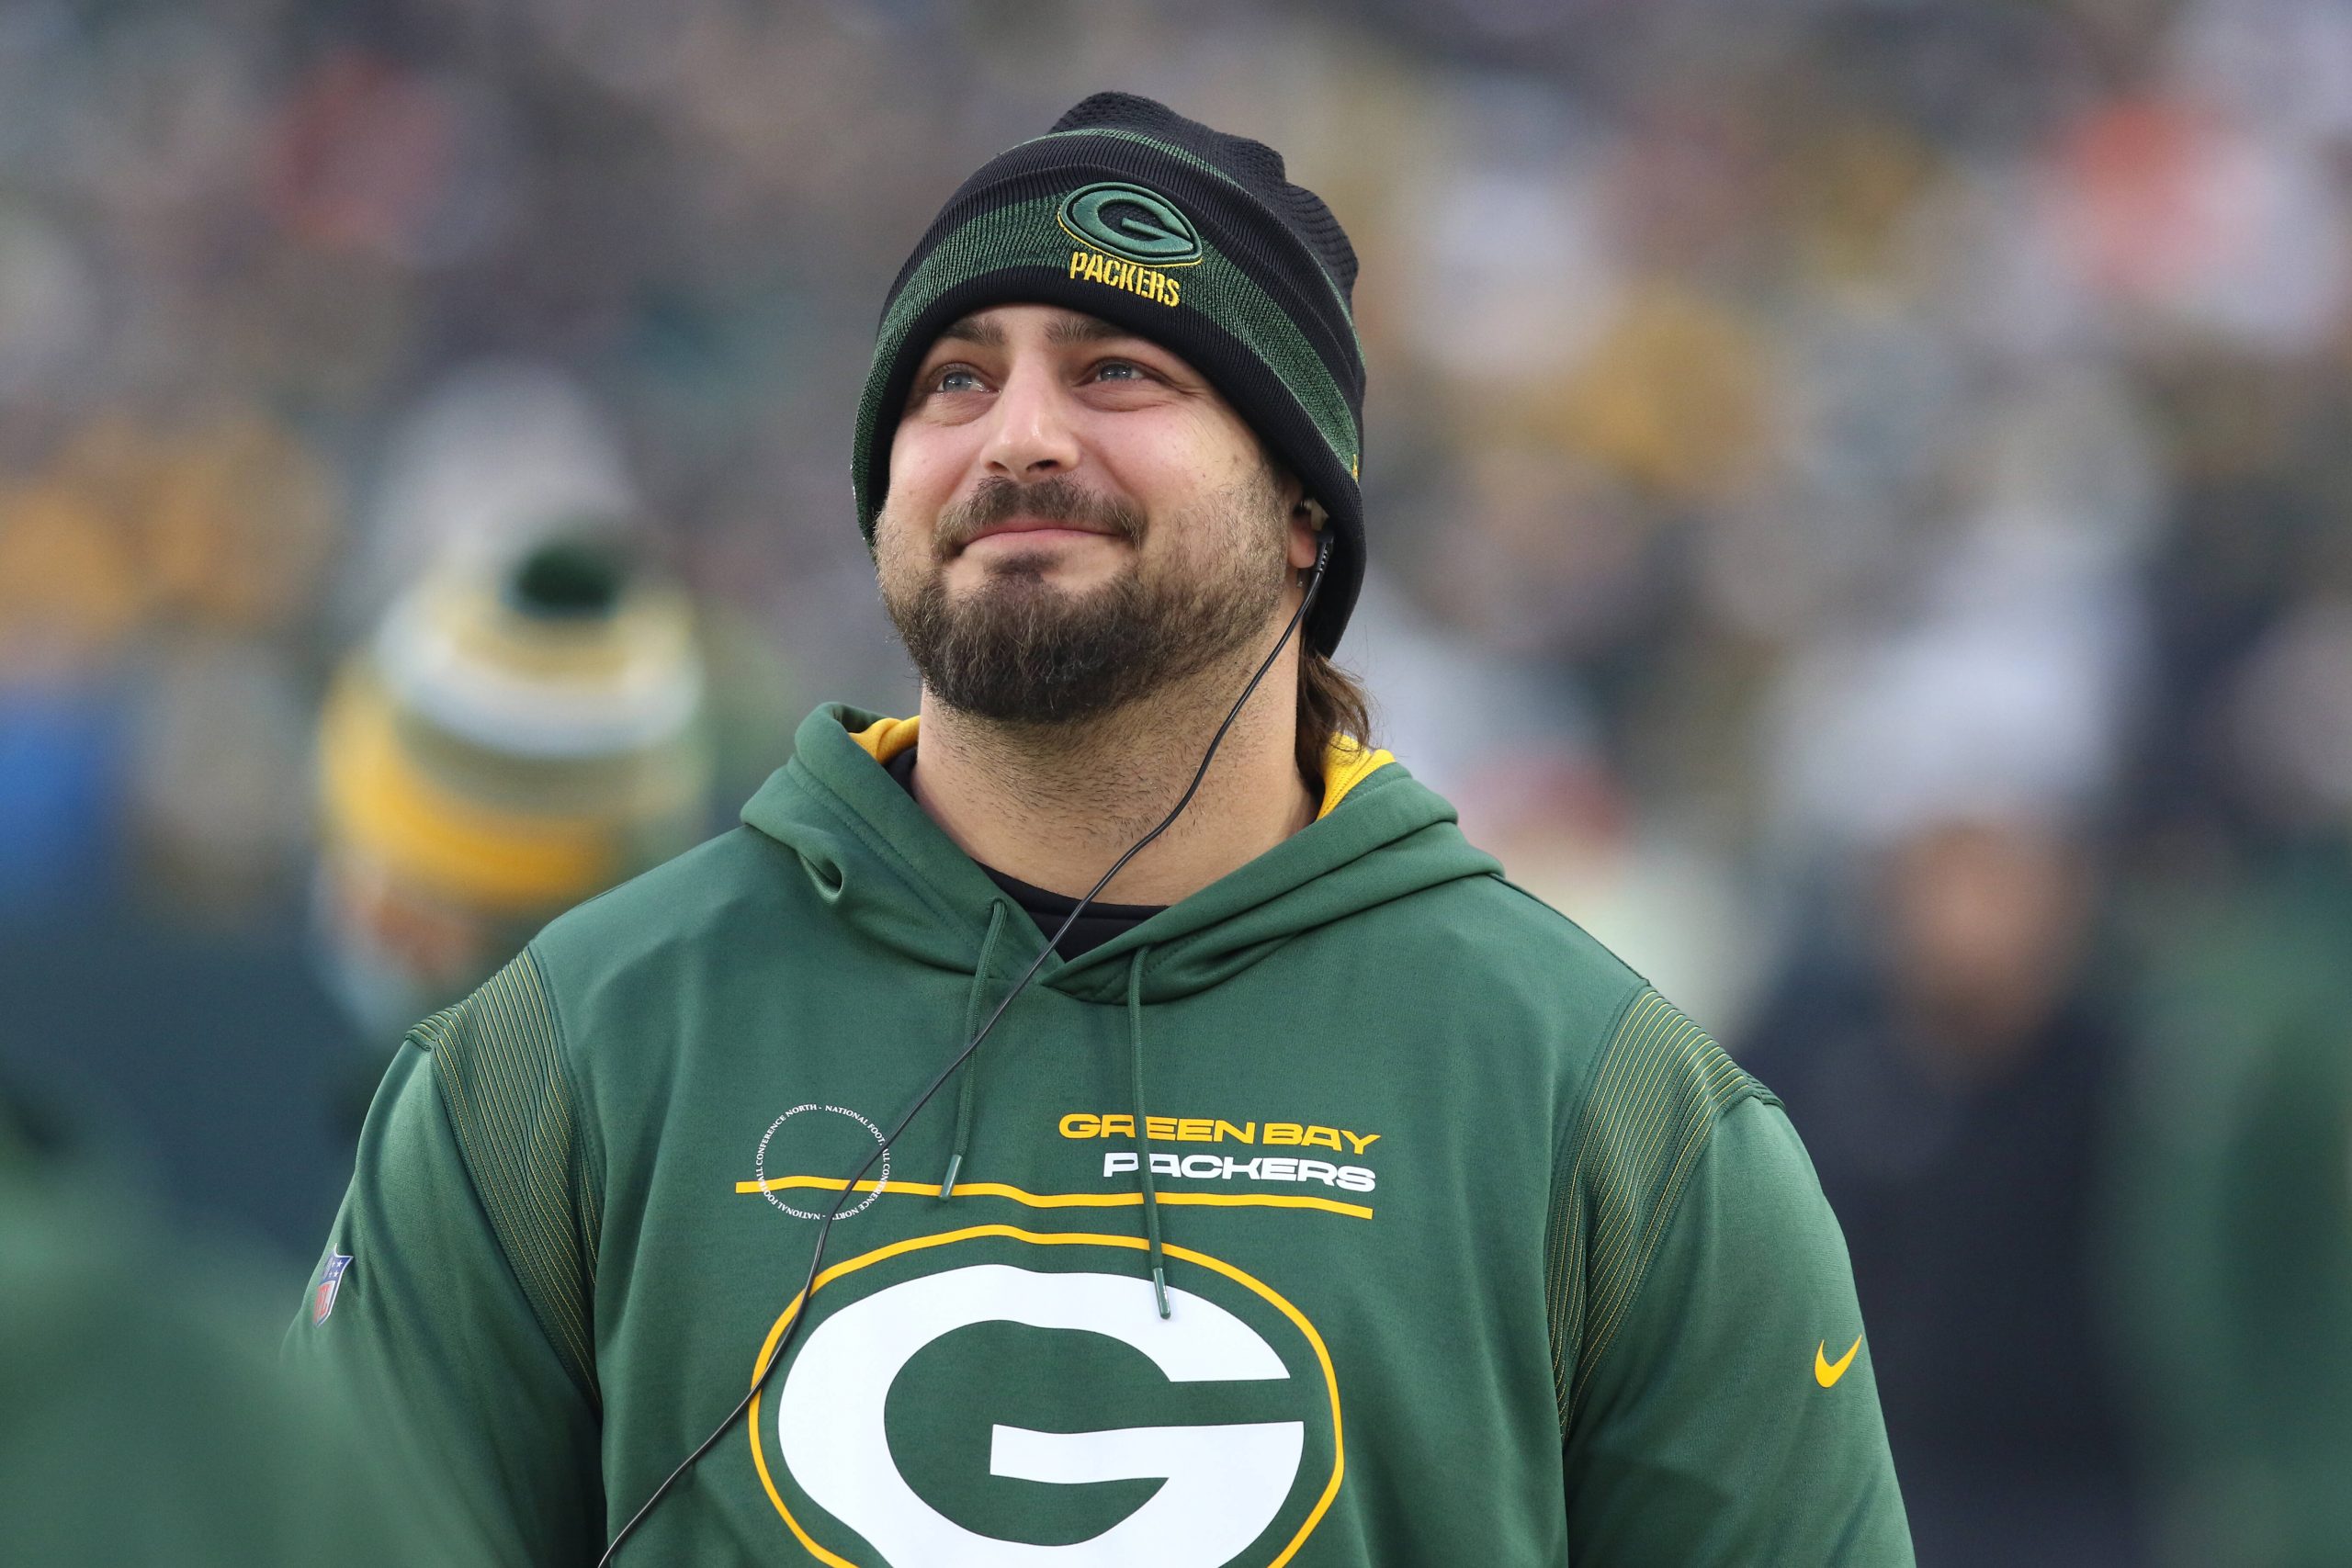 GREEN BAY, WI - DECEMBER 25: Green Bay Packers offensive tackle David Bakhtiari 69 looks on during a game between the Green Bay Packers and the Cleveland Browns on December 25, 2021 at Lambeau Field in Green Bay, WI. Photo by Larry Radloff/Icon Sportswire NFL, American Football Herren, USA DEC 25 Browns at Packers Icon2112253333